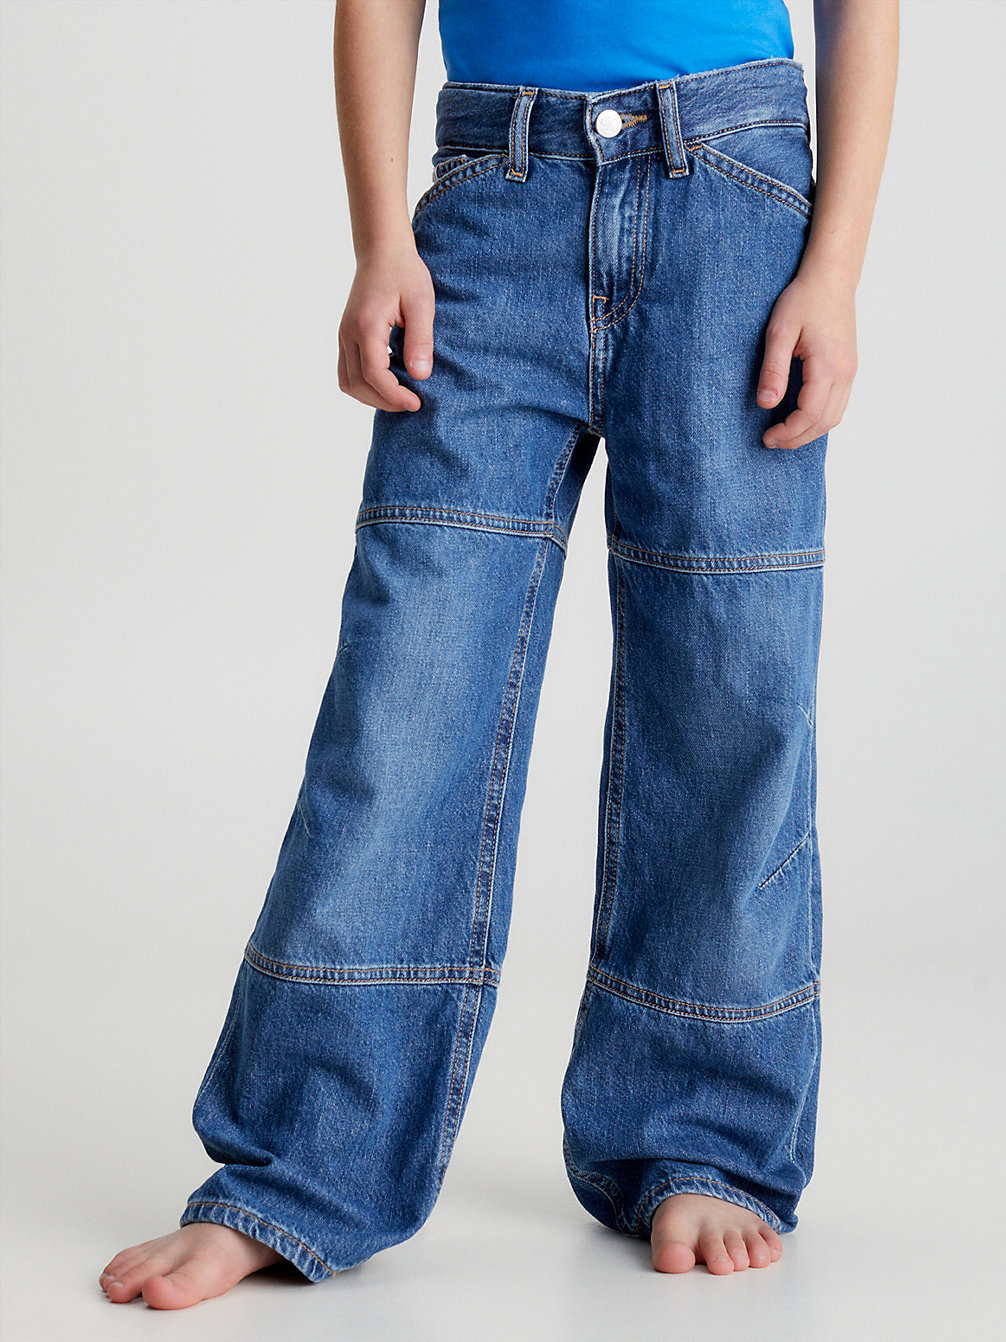 AUTHENTIC VINTAGE NEW > Relaxed Skater Jeans > undefined boys - Calvin Klein